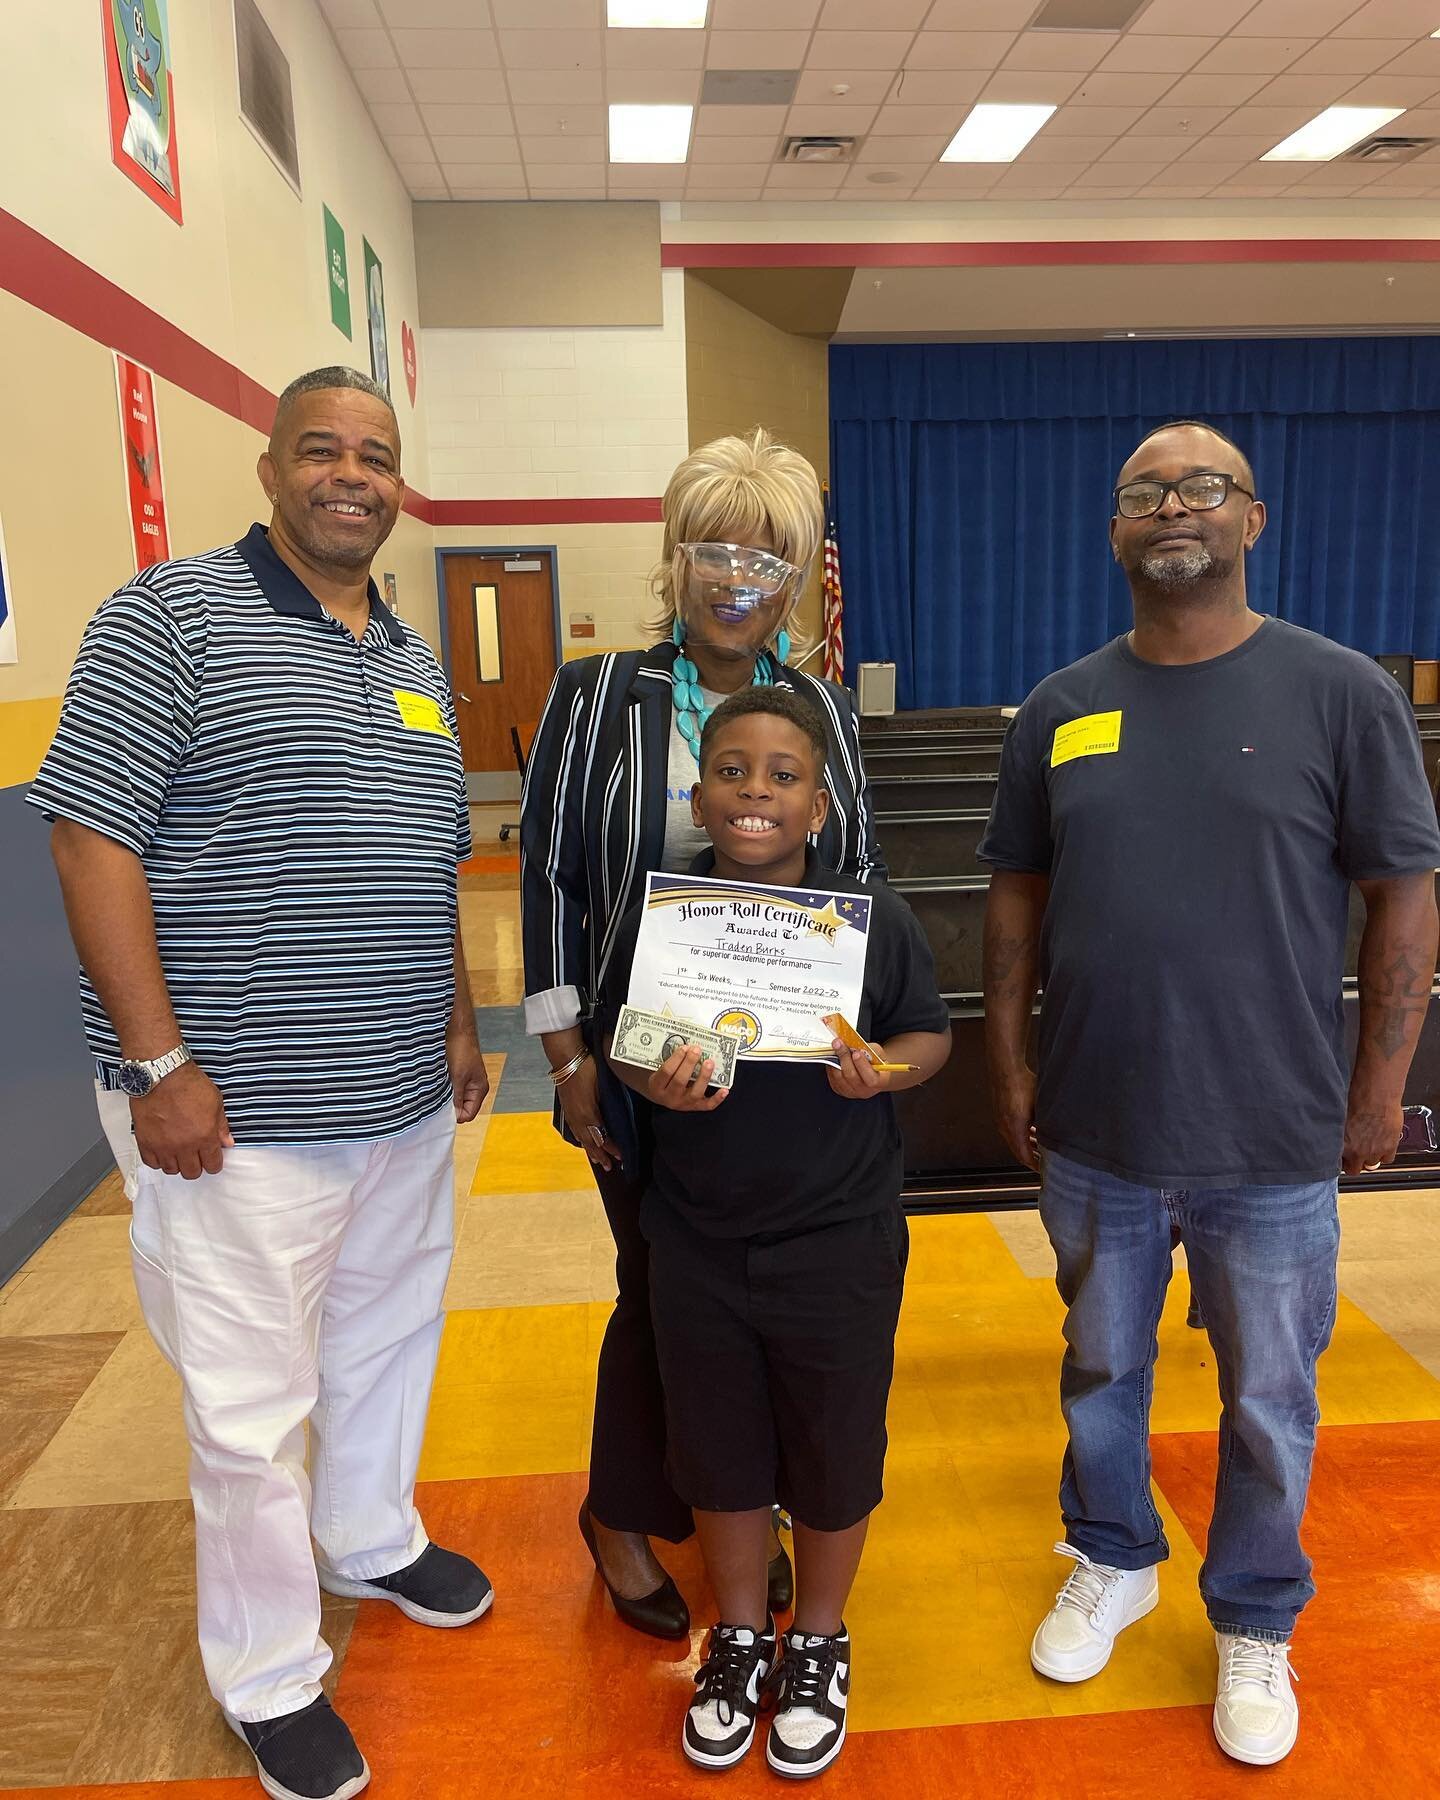 We are very proud of @jhhineselem honor roll students! We had 126 scholars make the AB honor roll in the 1st six weeks. Thank you to the @waconaacp for gifting goodies to our students and for helping present certificates #excellenceisexpected #jhhine